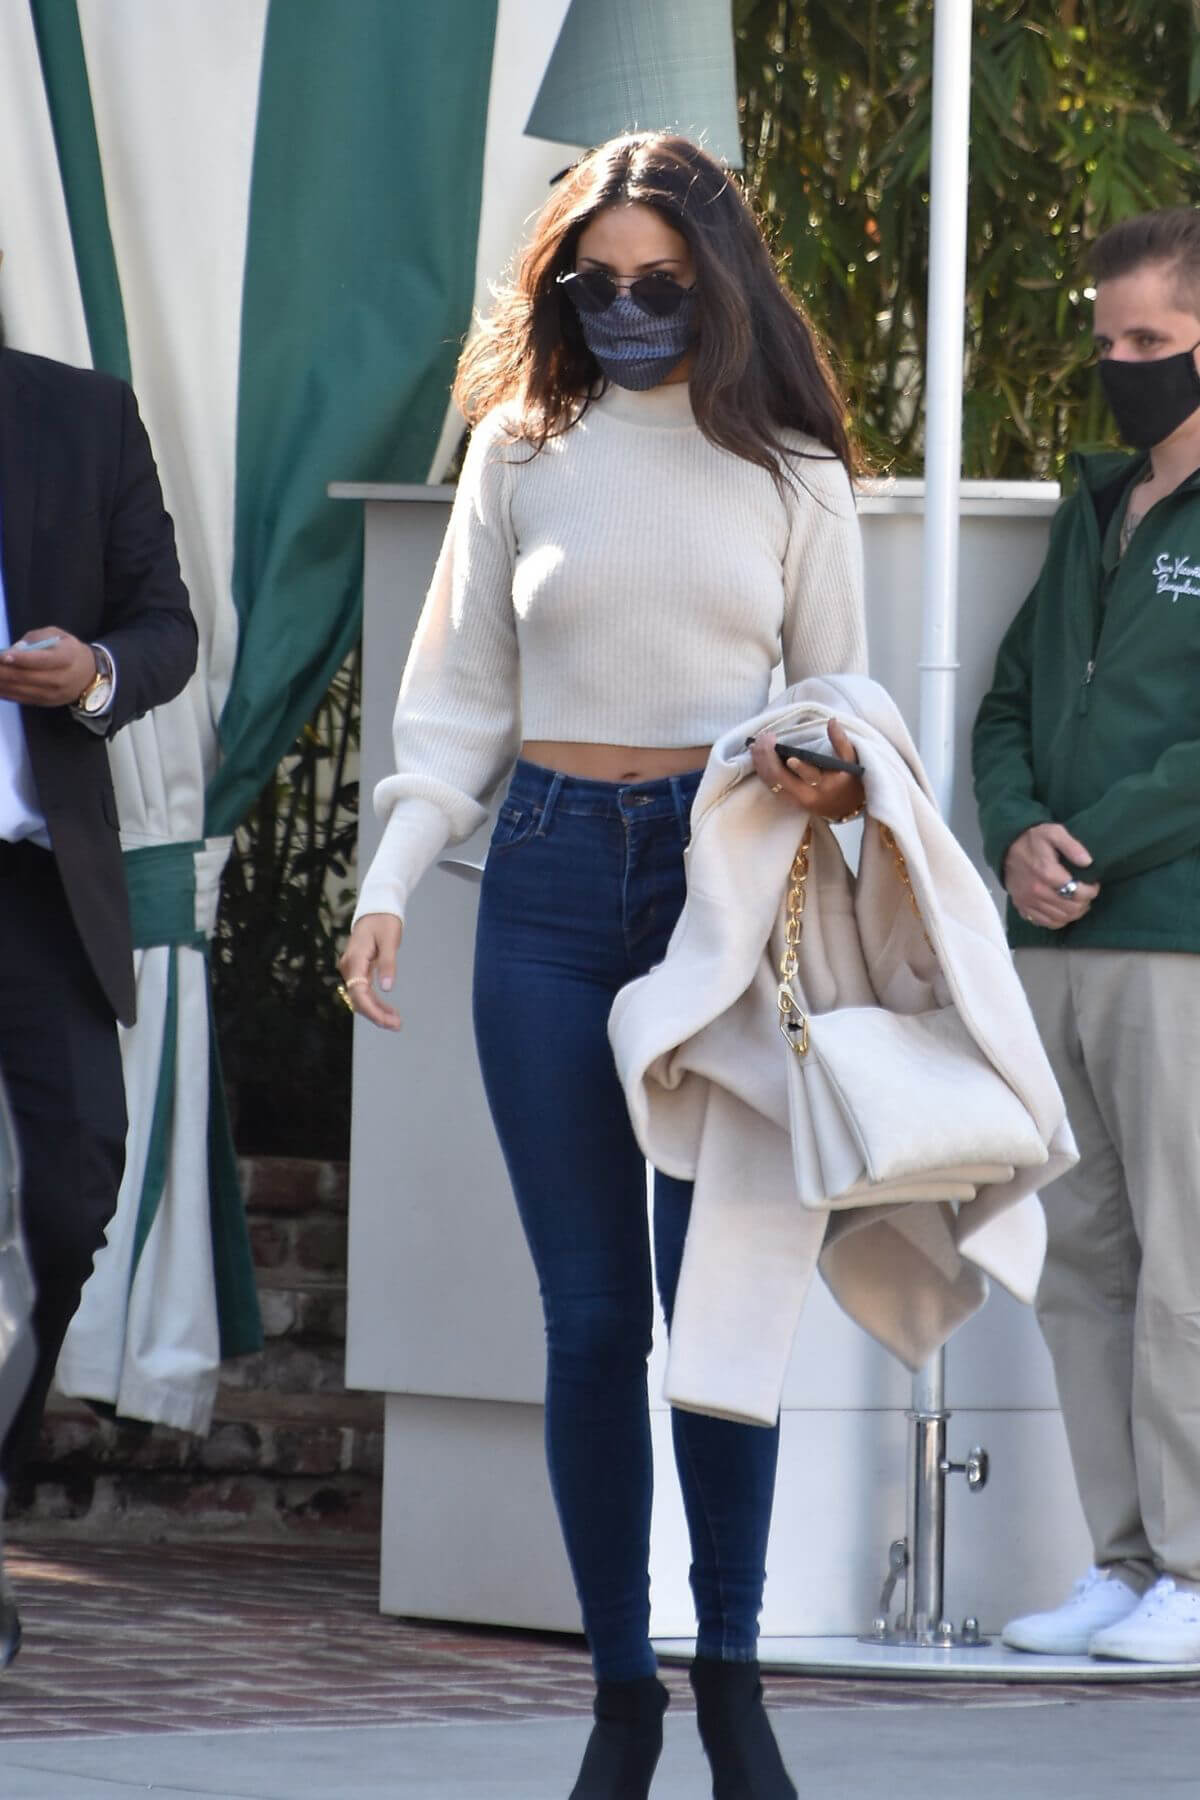 Eiza Gonzalez in Backless Cream Top Spotted at San Vicente Bungalows in West Hollywood 03/13/2021